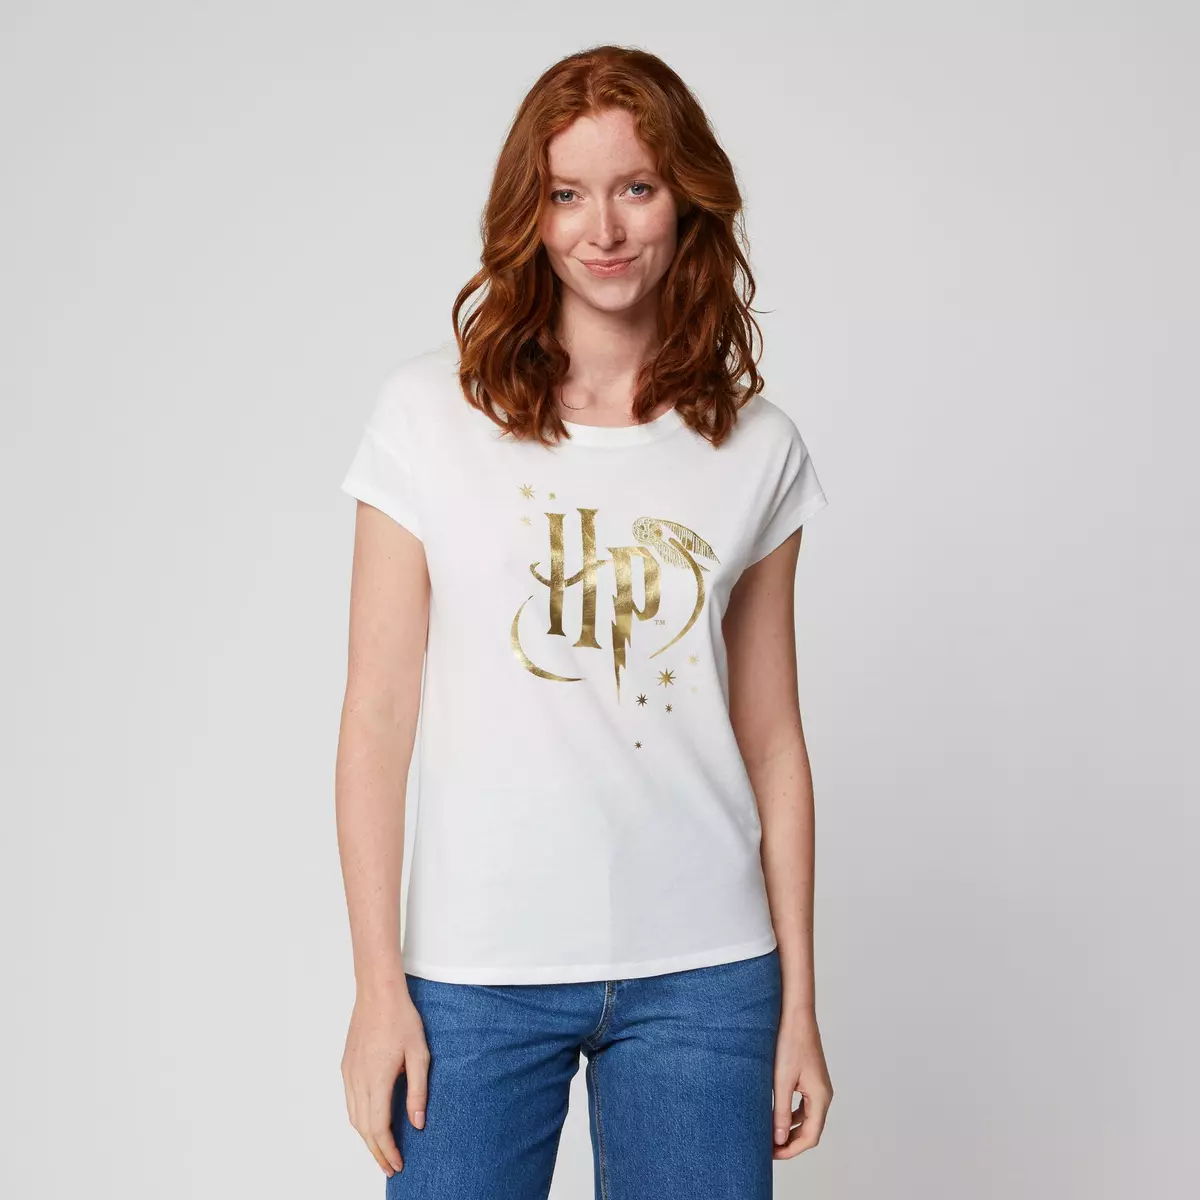 INEXTENSO T-shirt manches courtes blanc femme Harry Potter